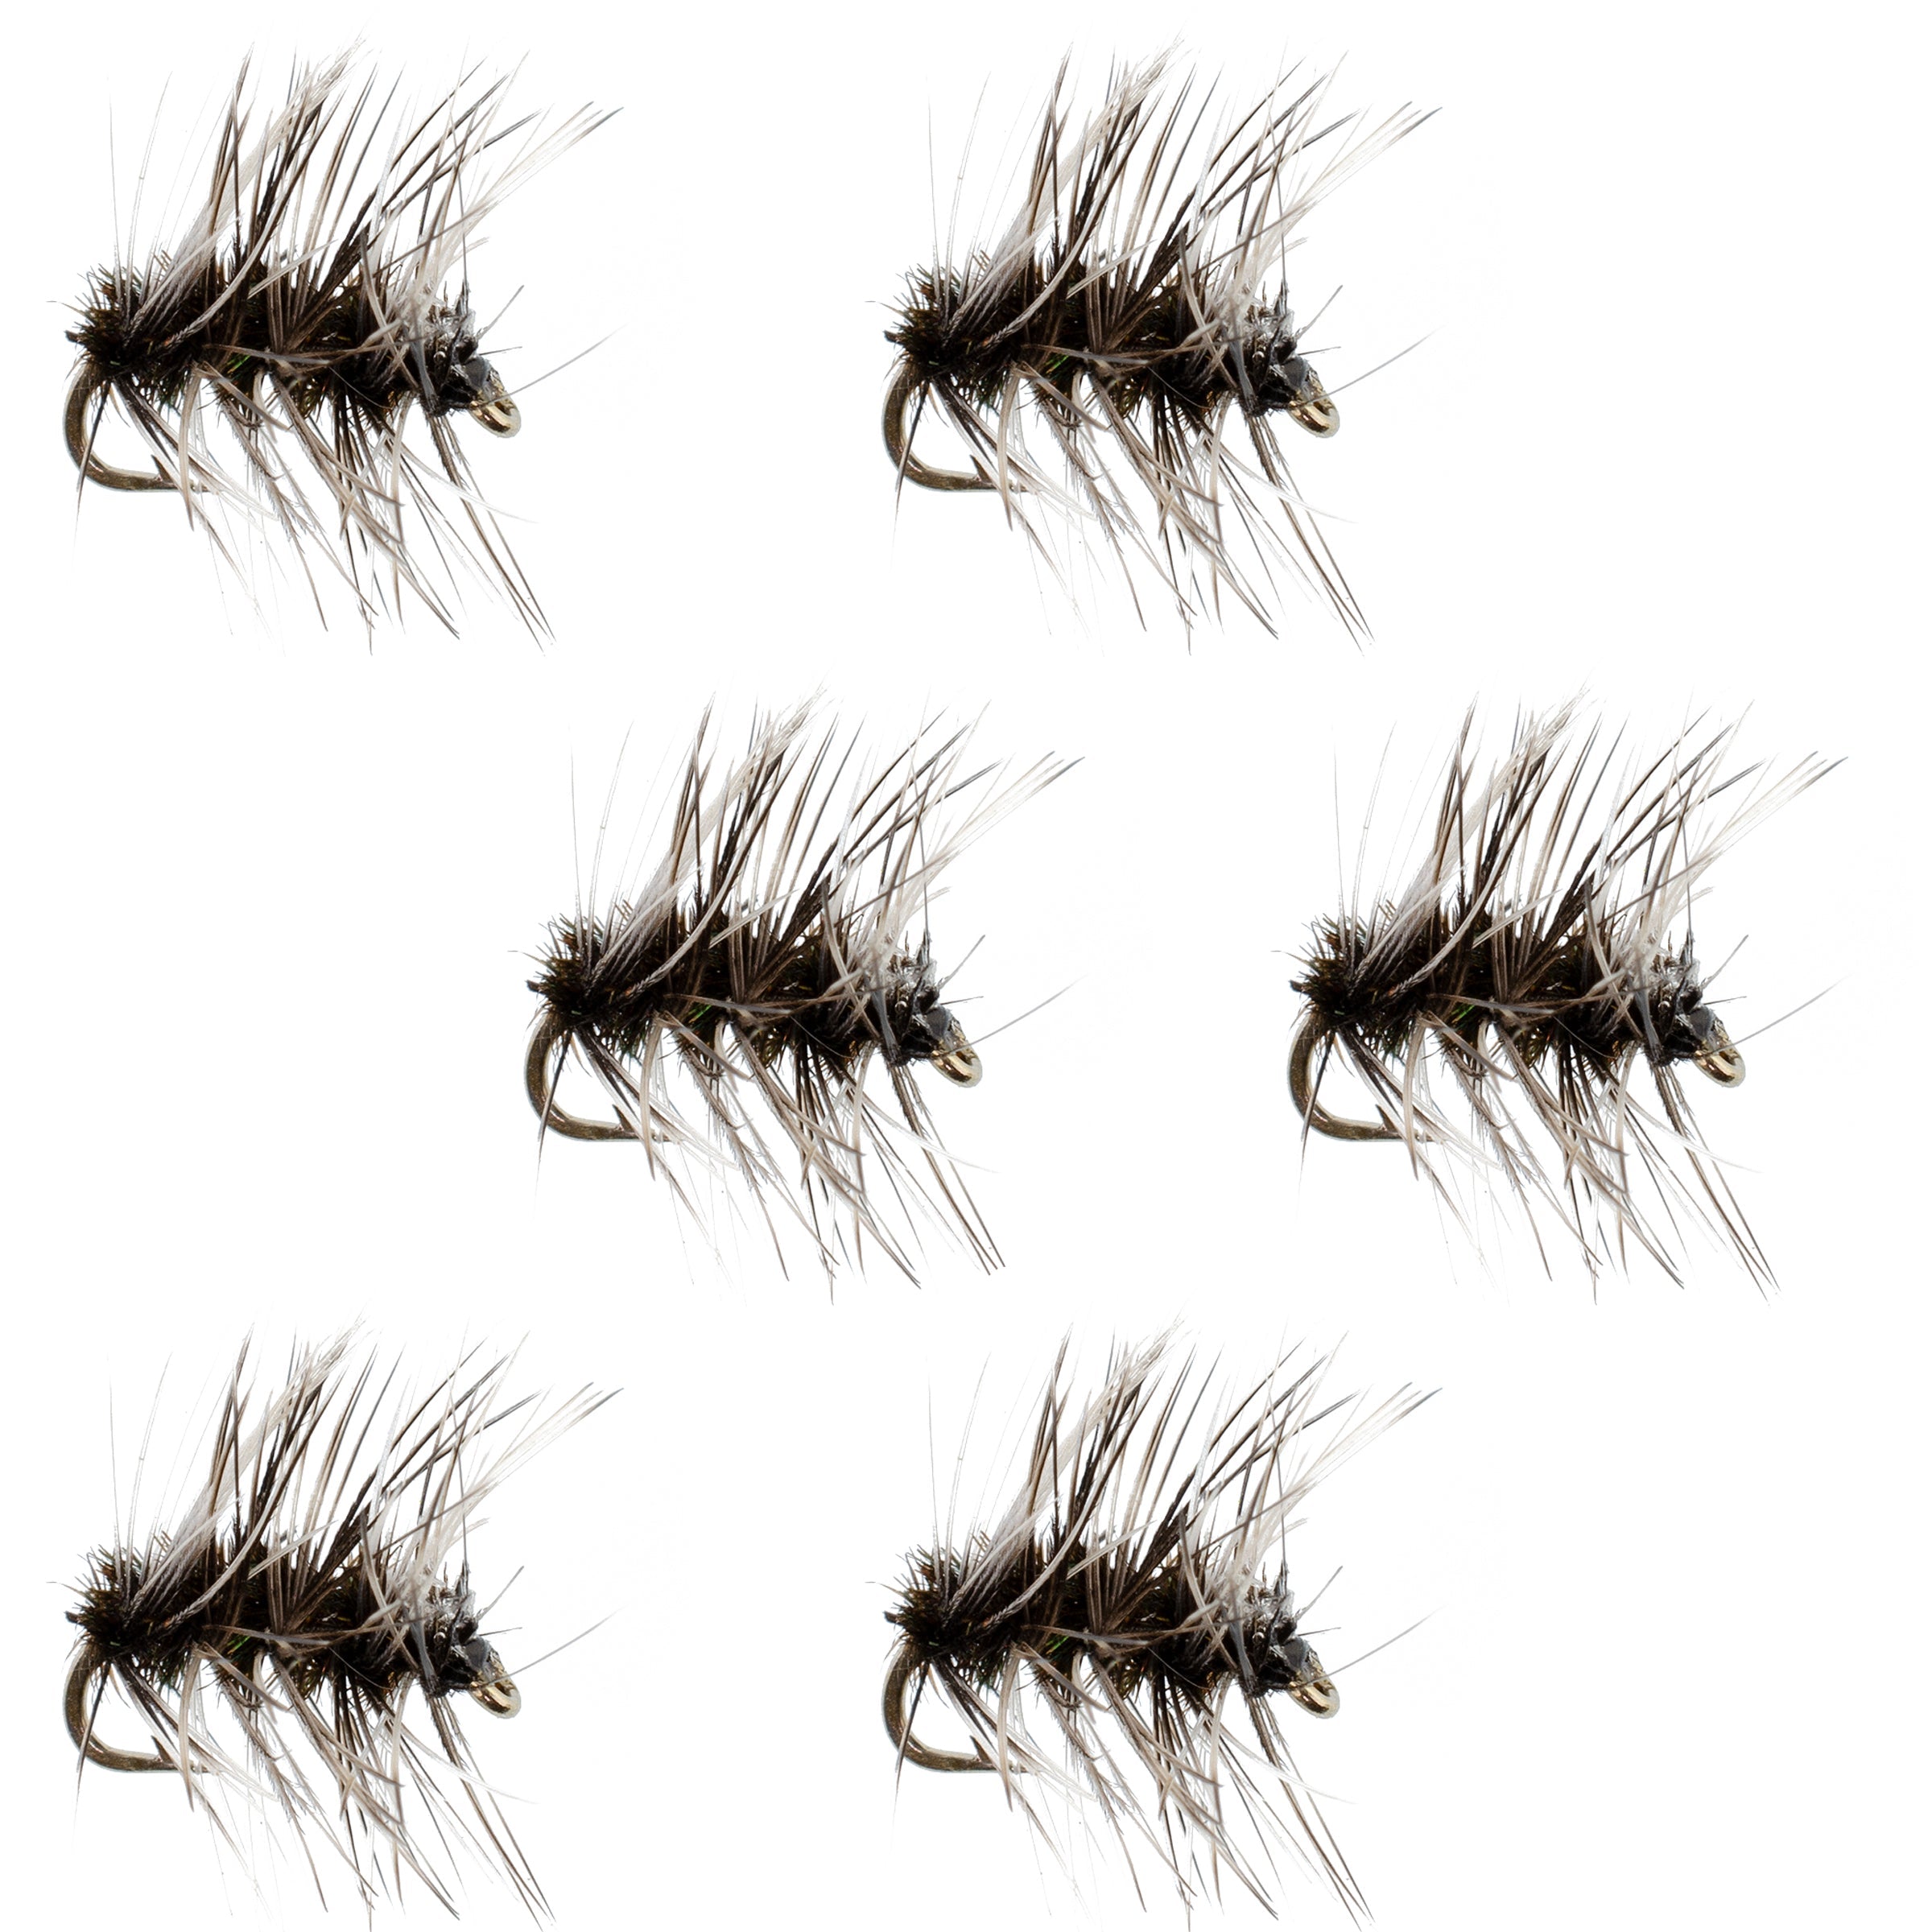 Barbless Griffiths Gnat Midge Trout Dry Fly Fishing Flies - 6 Flies Size 20